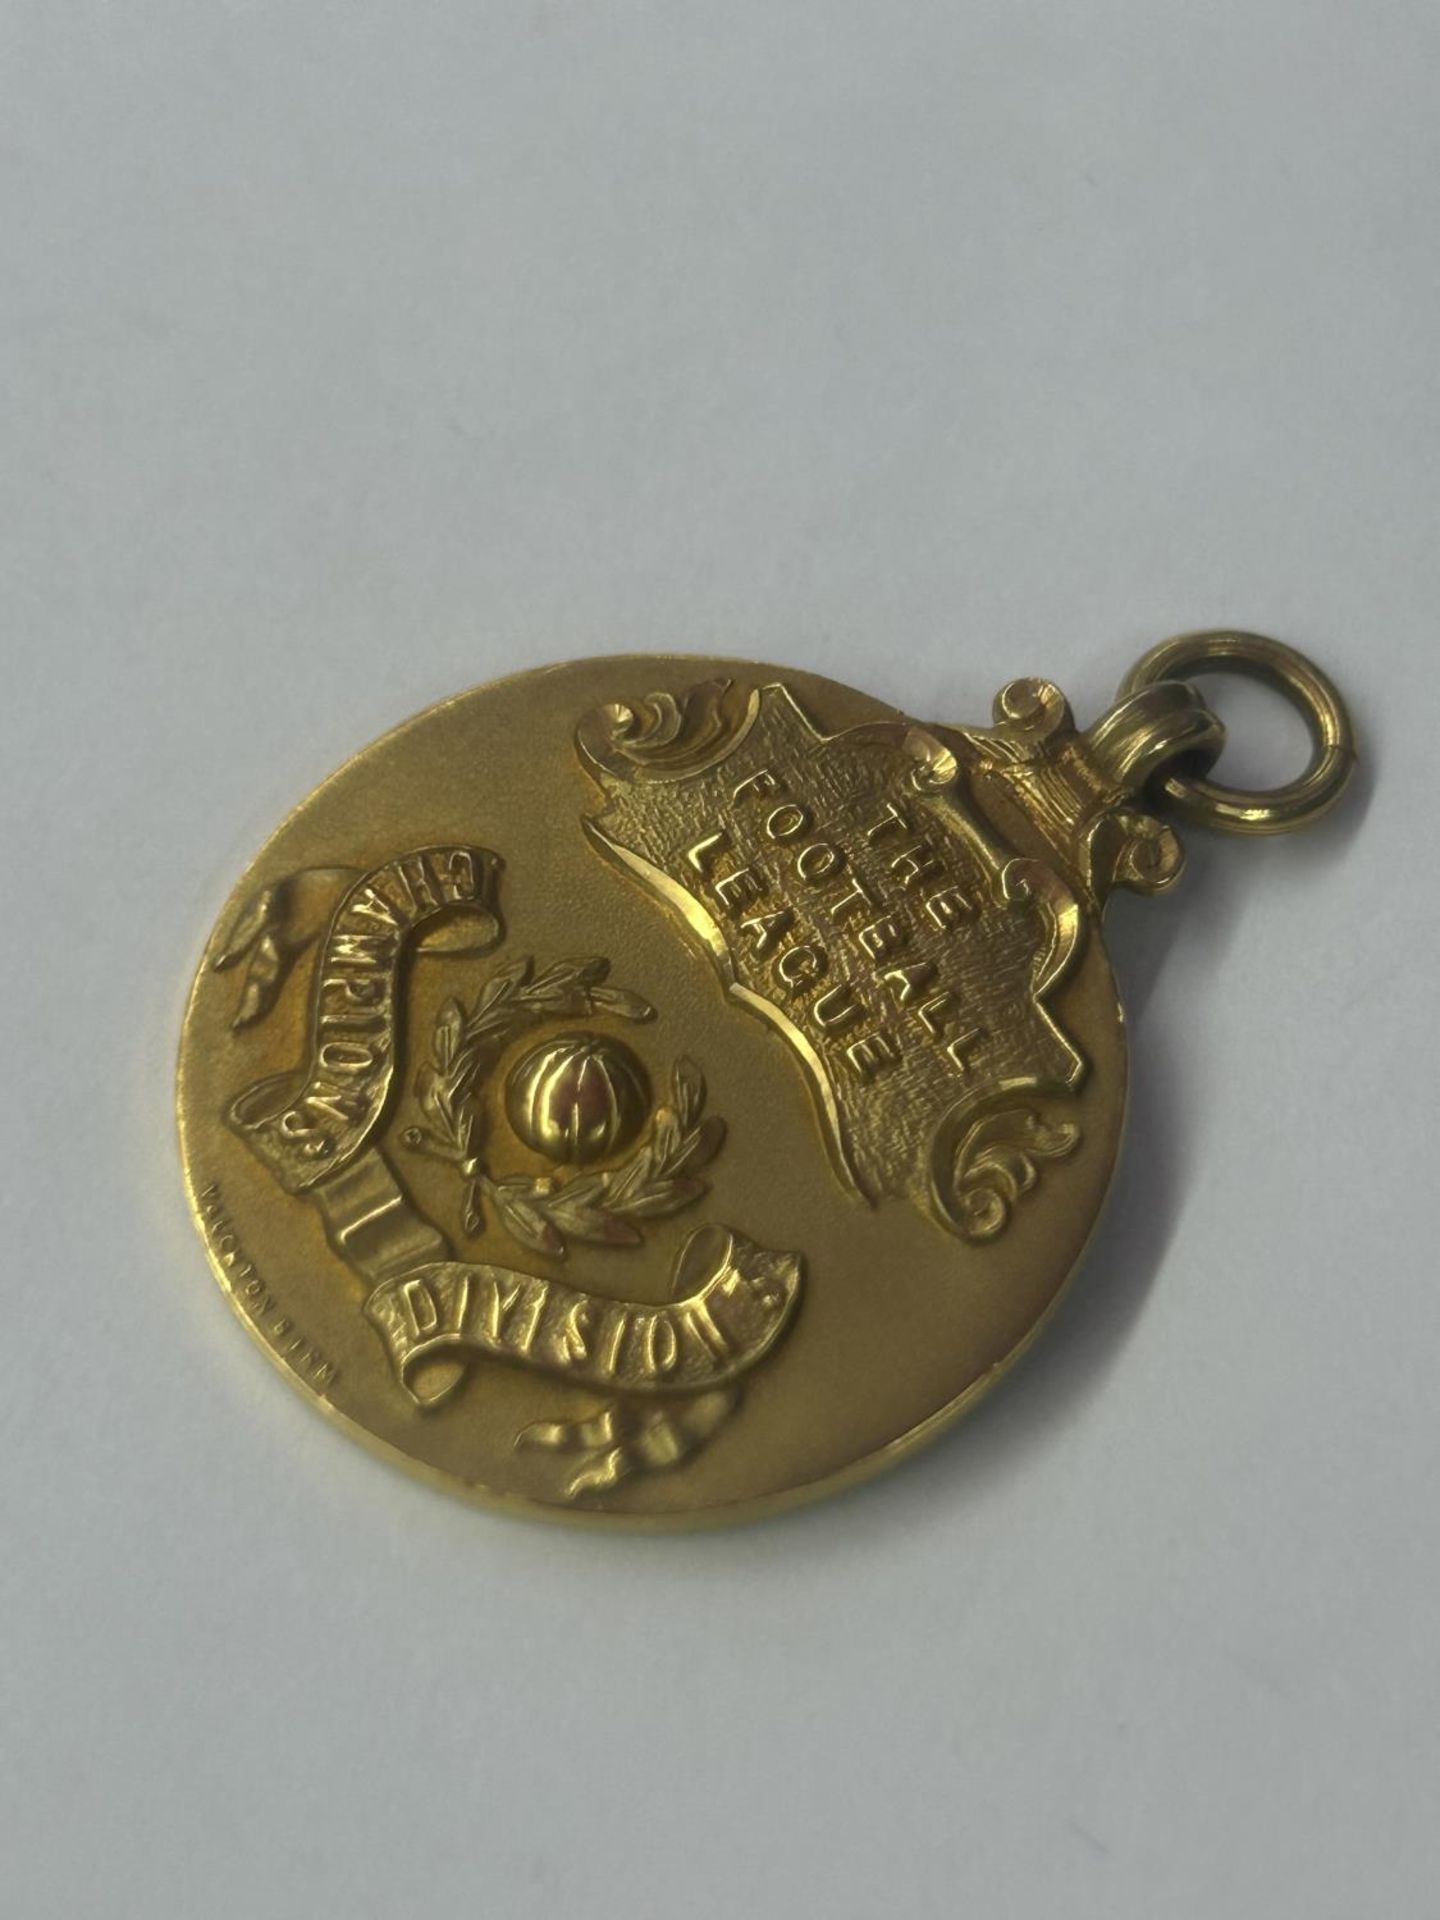 A HALLMARKED 9 CARAT GOLD FOOTBALL LEAGUE DIVISION 3 LEAGUE WINNERS MEDAL 1967-1968 SEASON, BY - Image 4 of 5